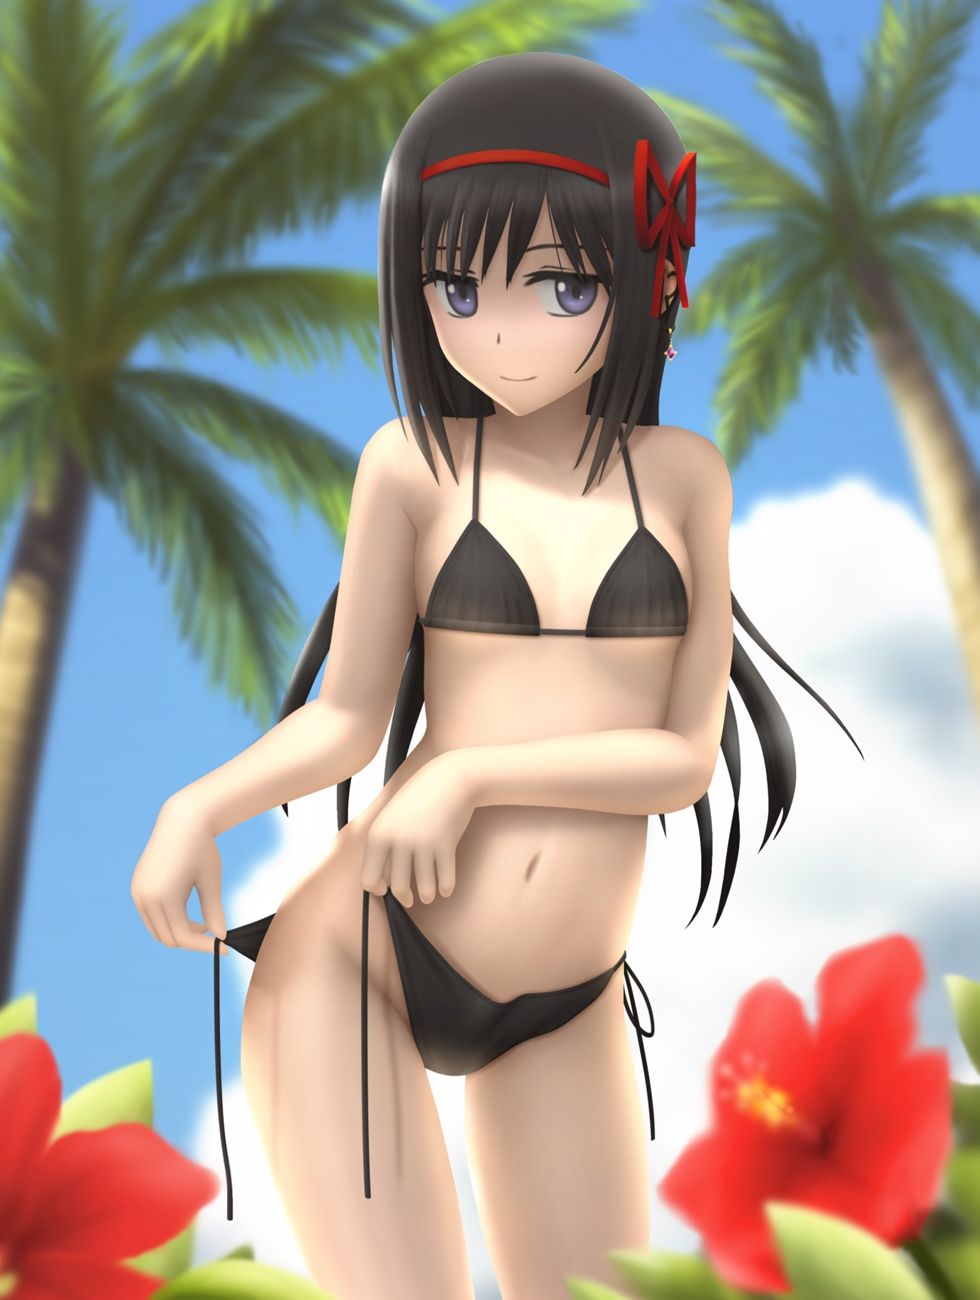 Worship the swimsuit figure of the too dazzling second daughter; inverse そうぜ wwwwwwwwwwwww 11